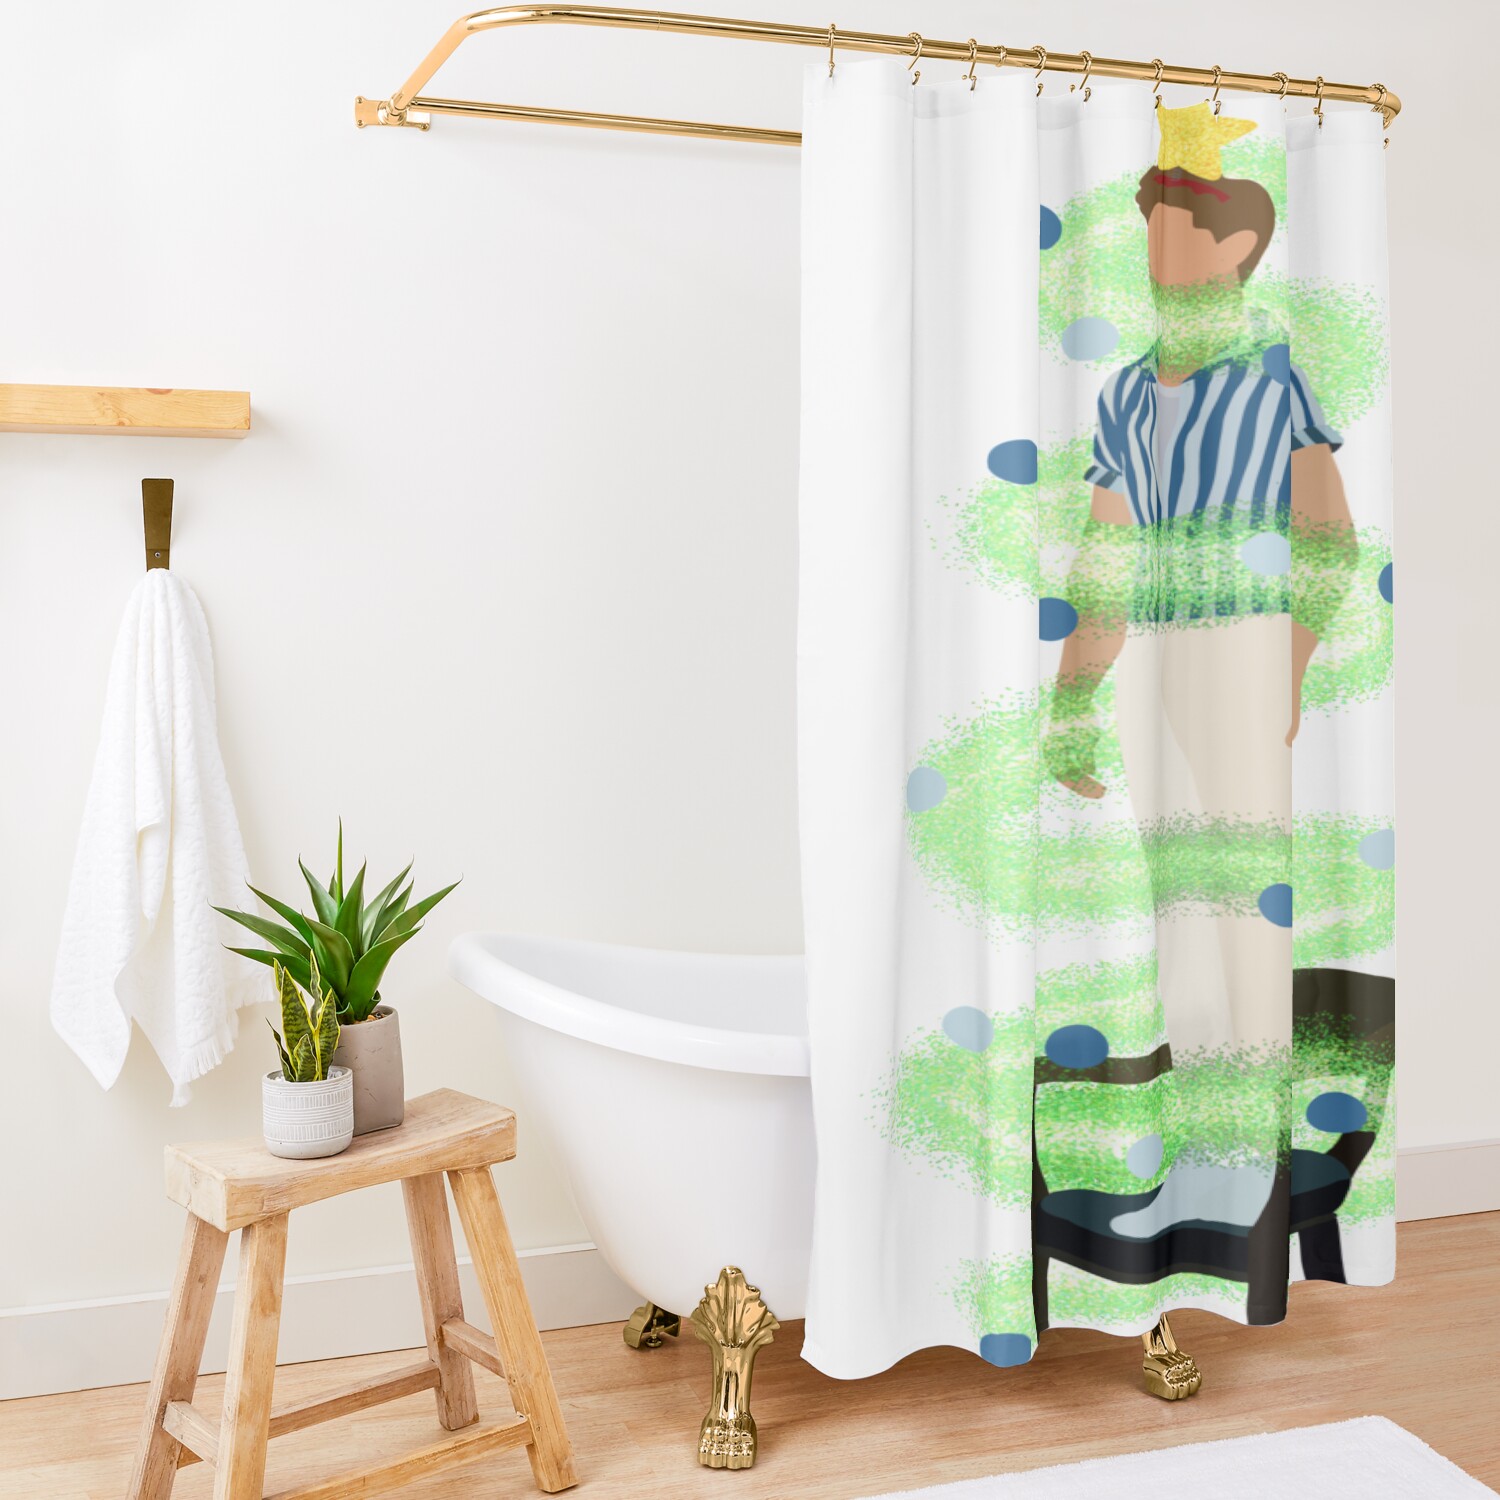 urshower curtain opensquare1500x1500 17 - Niall Horan Shop